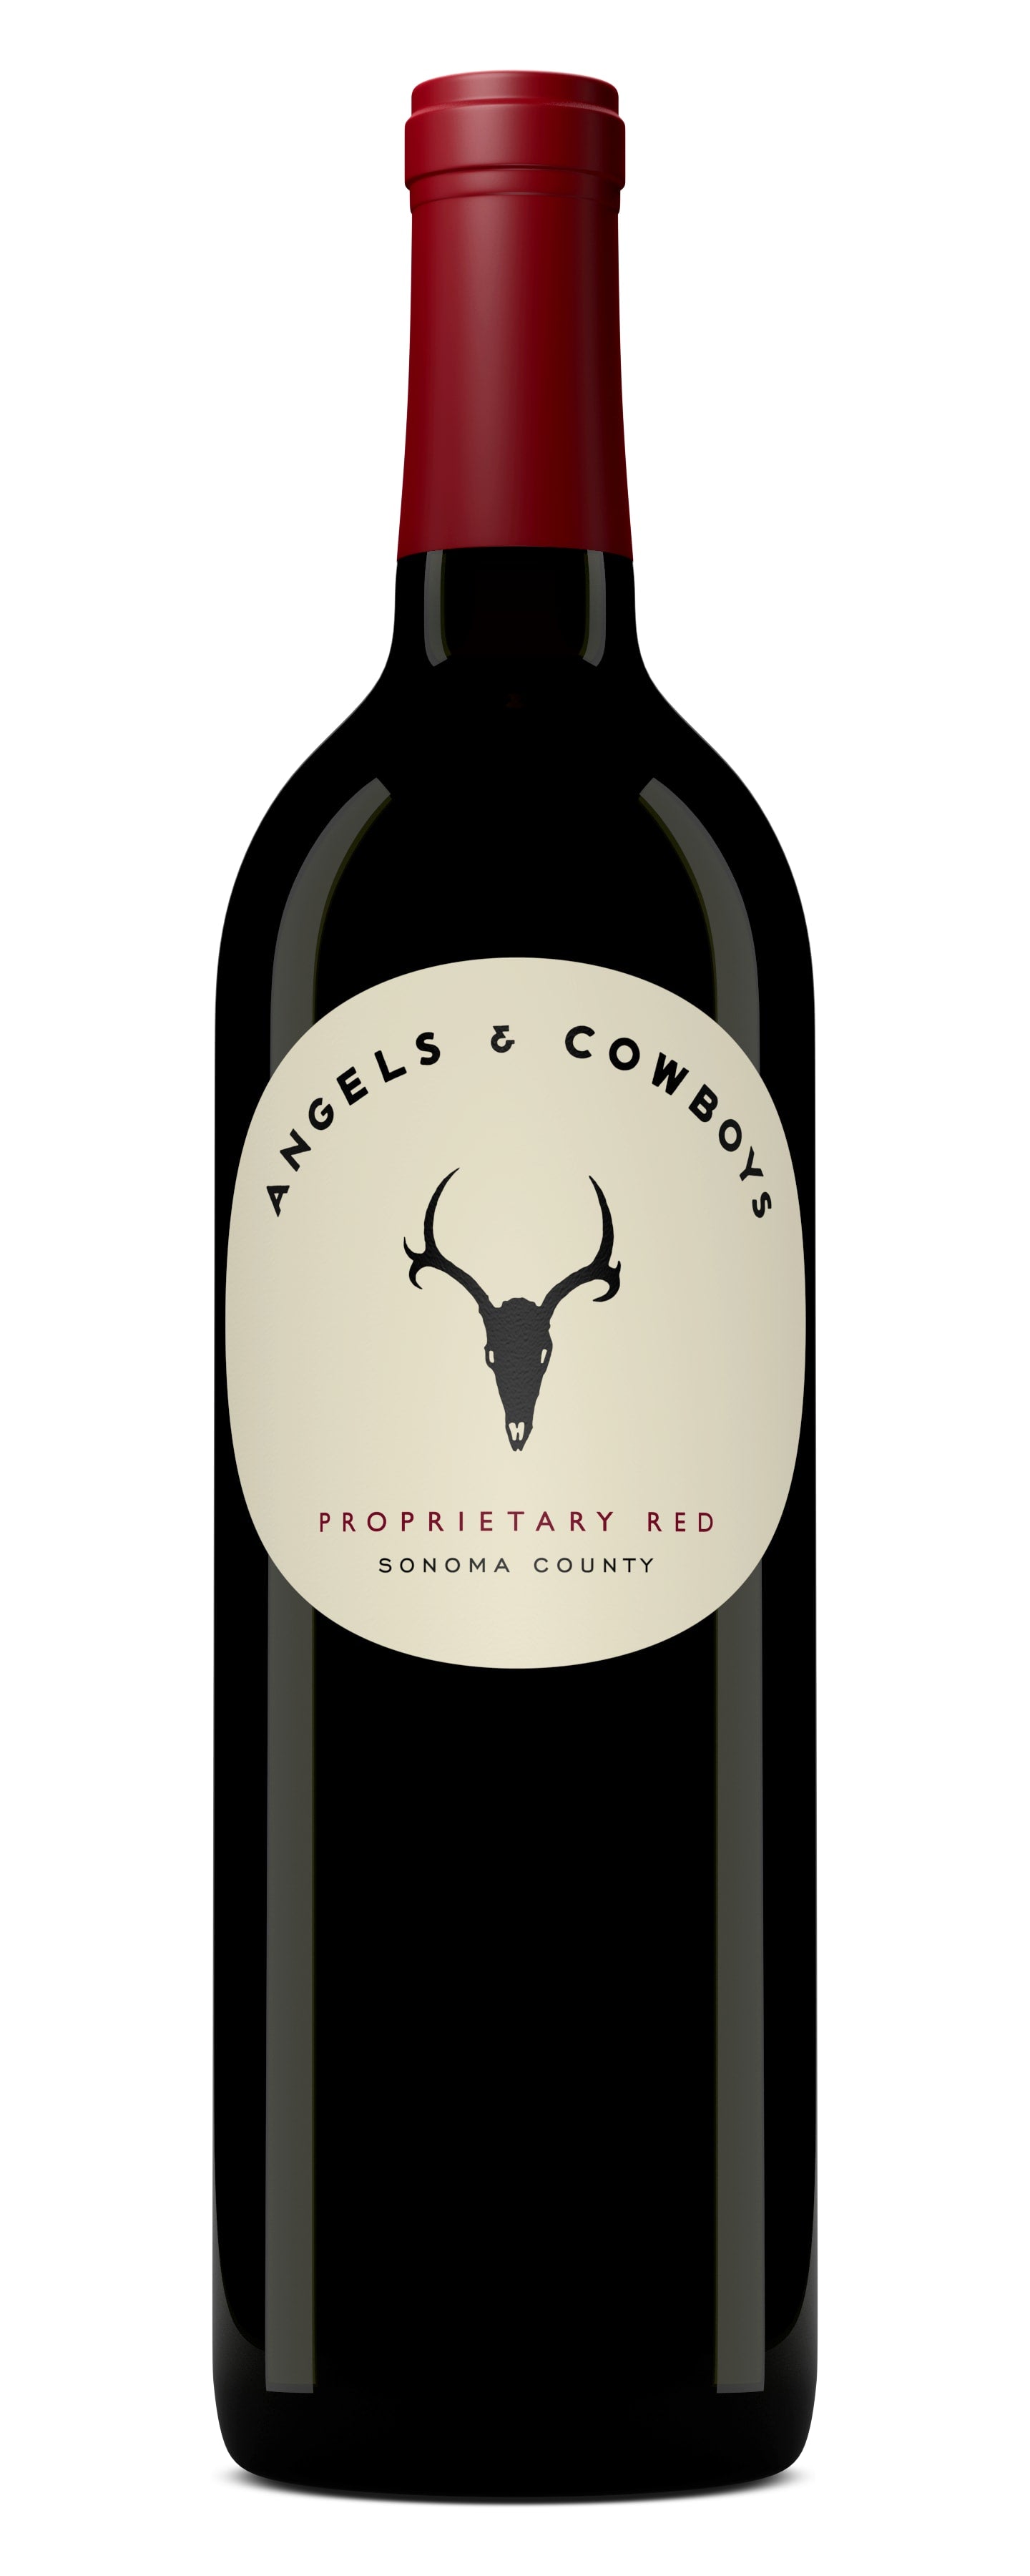 Angels & Cowboys Proprietary Red 2018